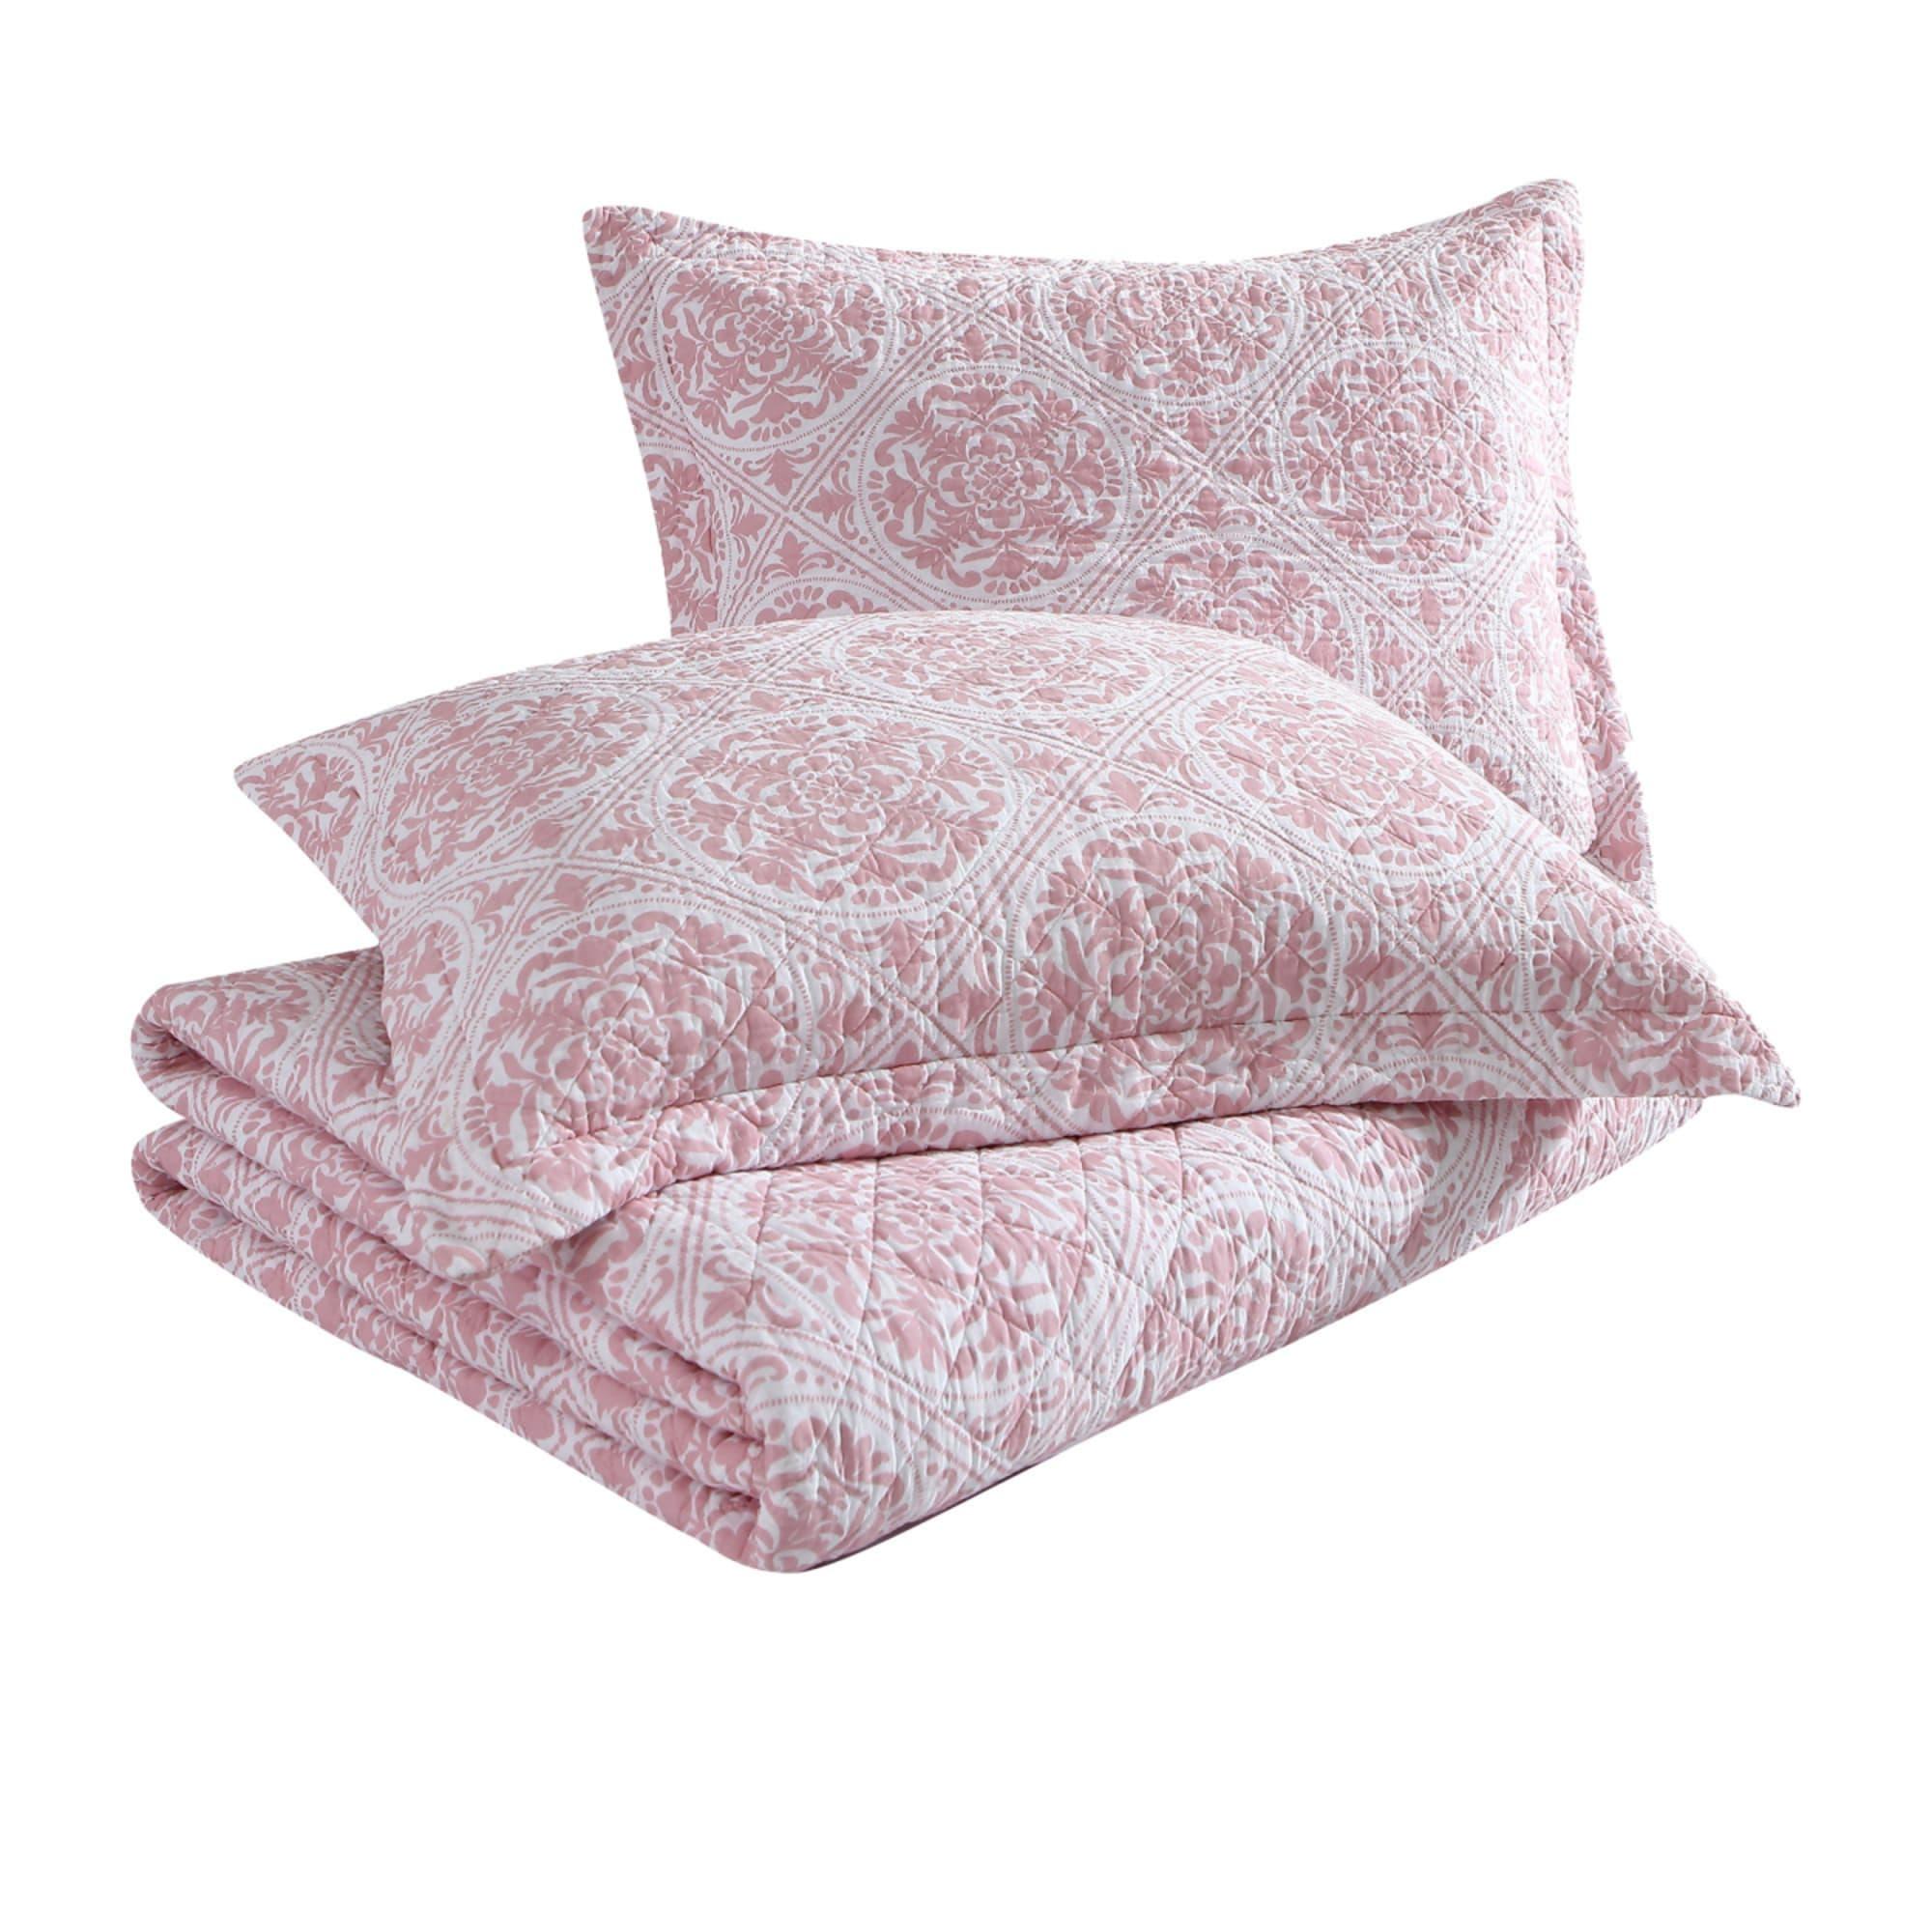 Laura Ashley Ayla Printed Coverlet Set Queen/King Image 5